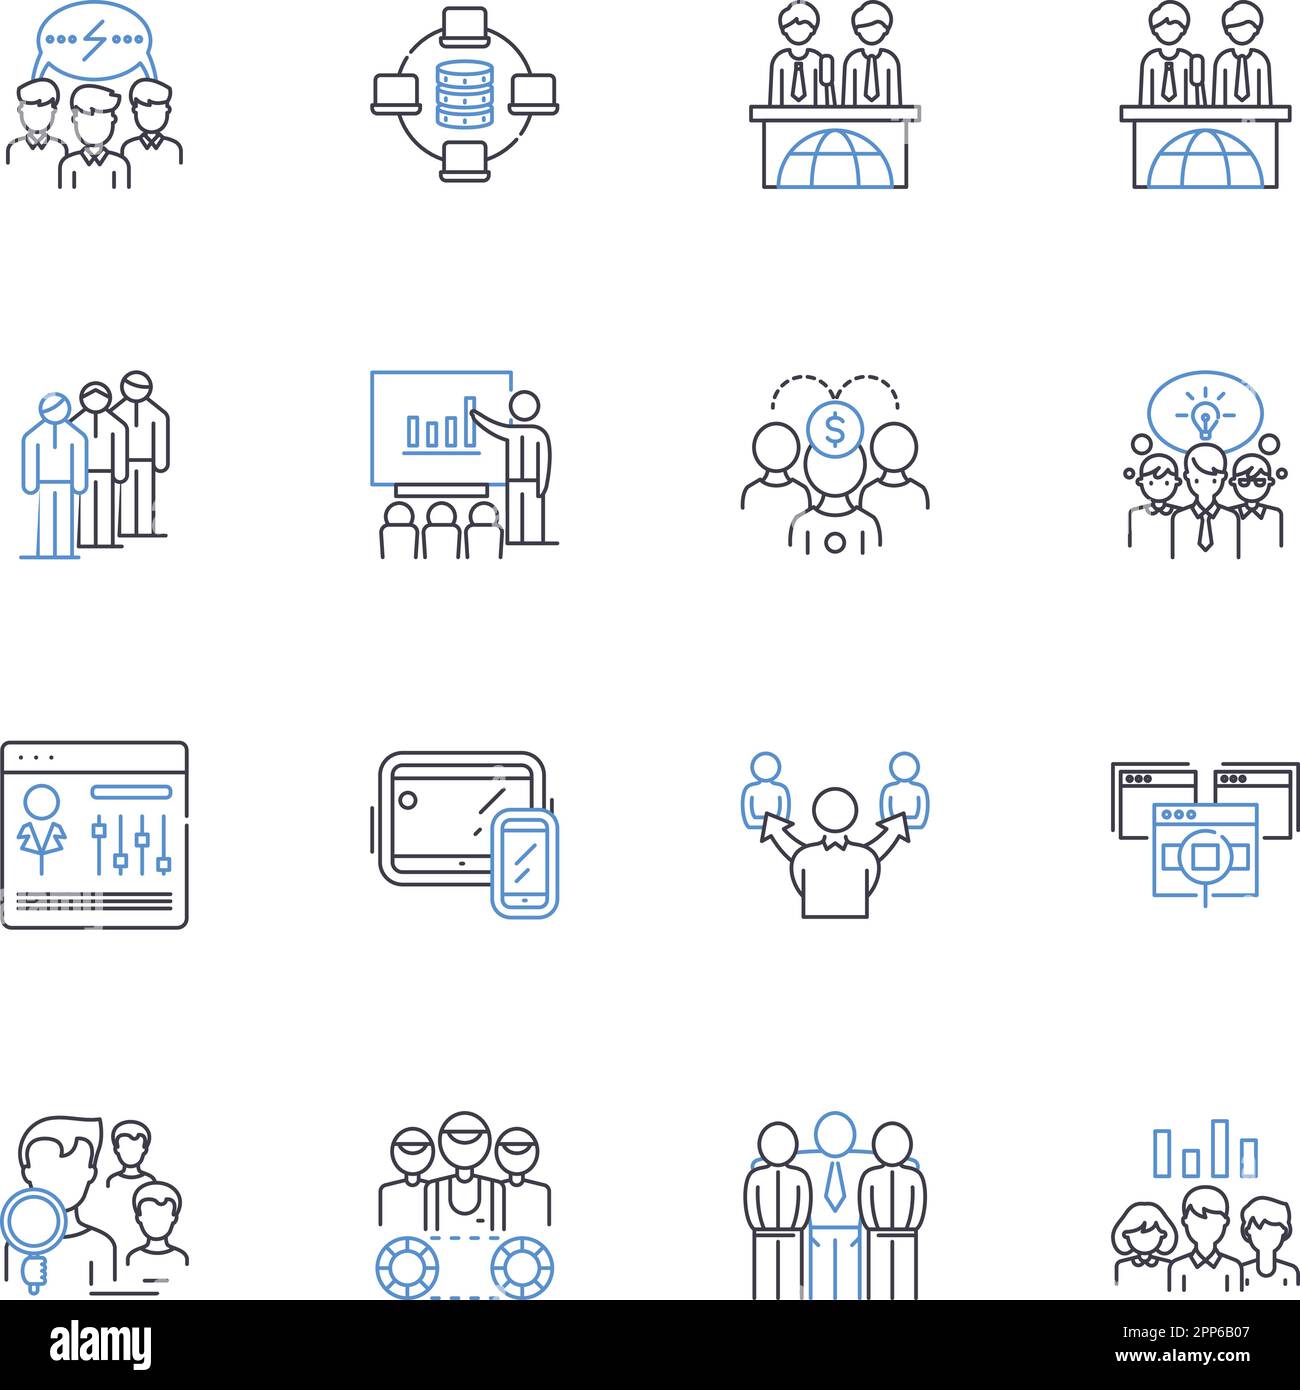 Interchange and dialogue line icons collection. Communication, Exchange, Conversation, Discourse, Interconnectivity, Discussion, Collaboration vector Stock Vector